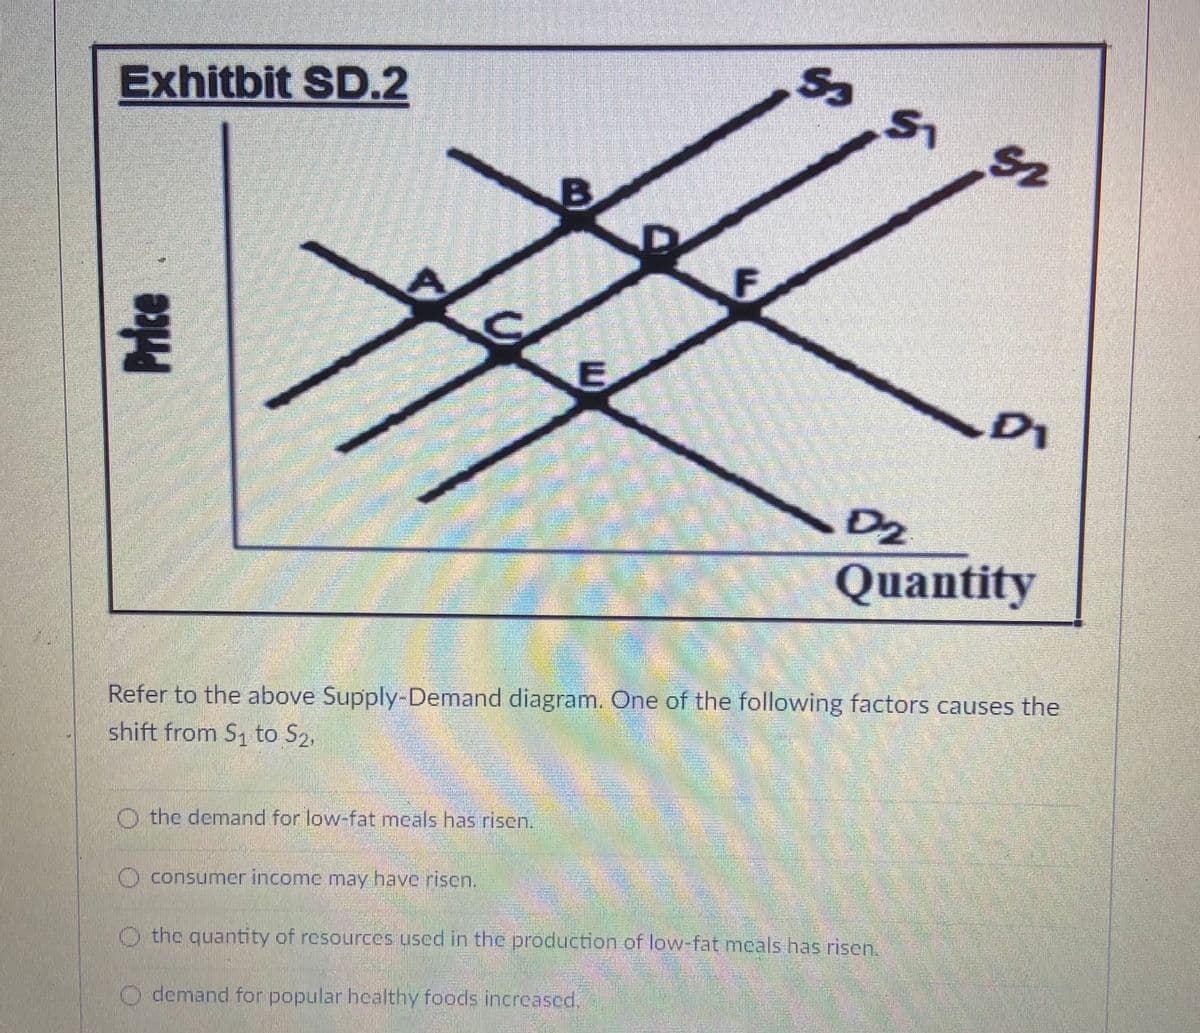 Exhitbit SD.2
DI
D2
|Quantity
Refer to the above Supply-Demand diagram. One of the following factors causes the
shift from S1 to S2,
O the demand for low-fat meals has risen.
O consumer income may have risen.
O the quantity of resources used in the production of low-fat mcals has risen.
demand for popular hcalthy foods increased.
Price
E.
